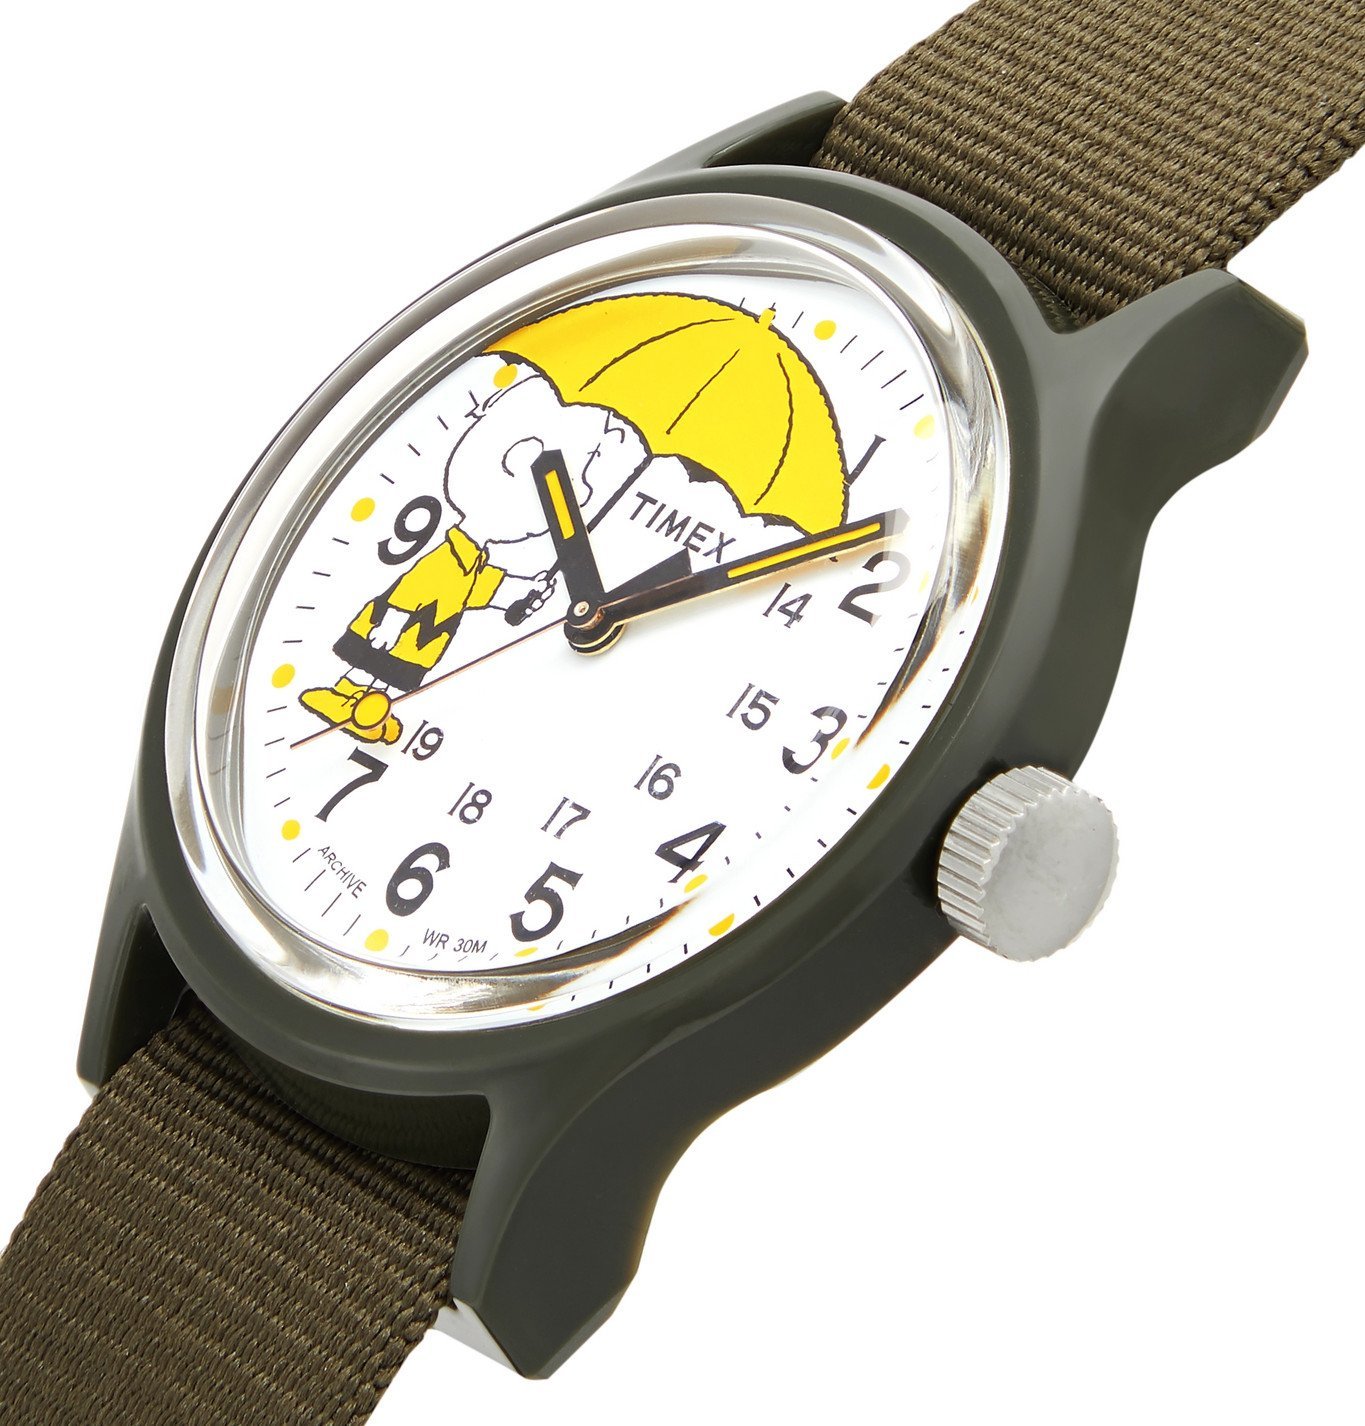 Timex - Peanuts MK1 36mm Resin and NATO Watch - Green Timex